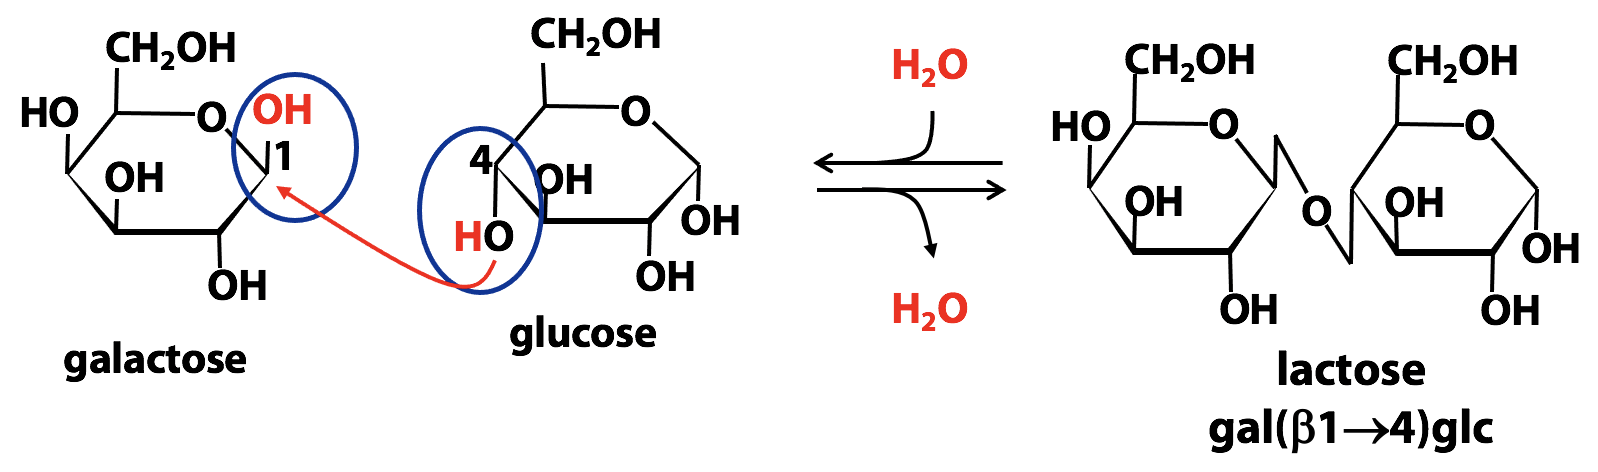 15. What is the structure of beta fructose